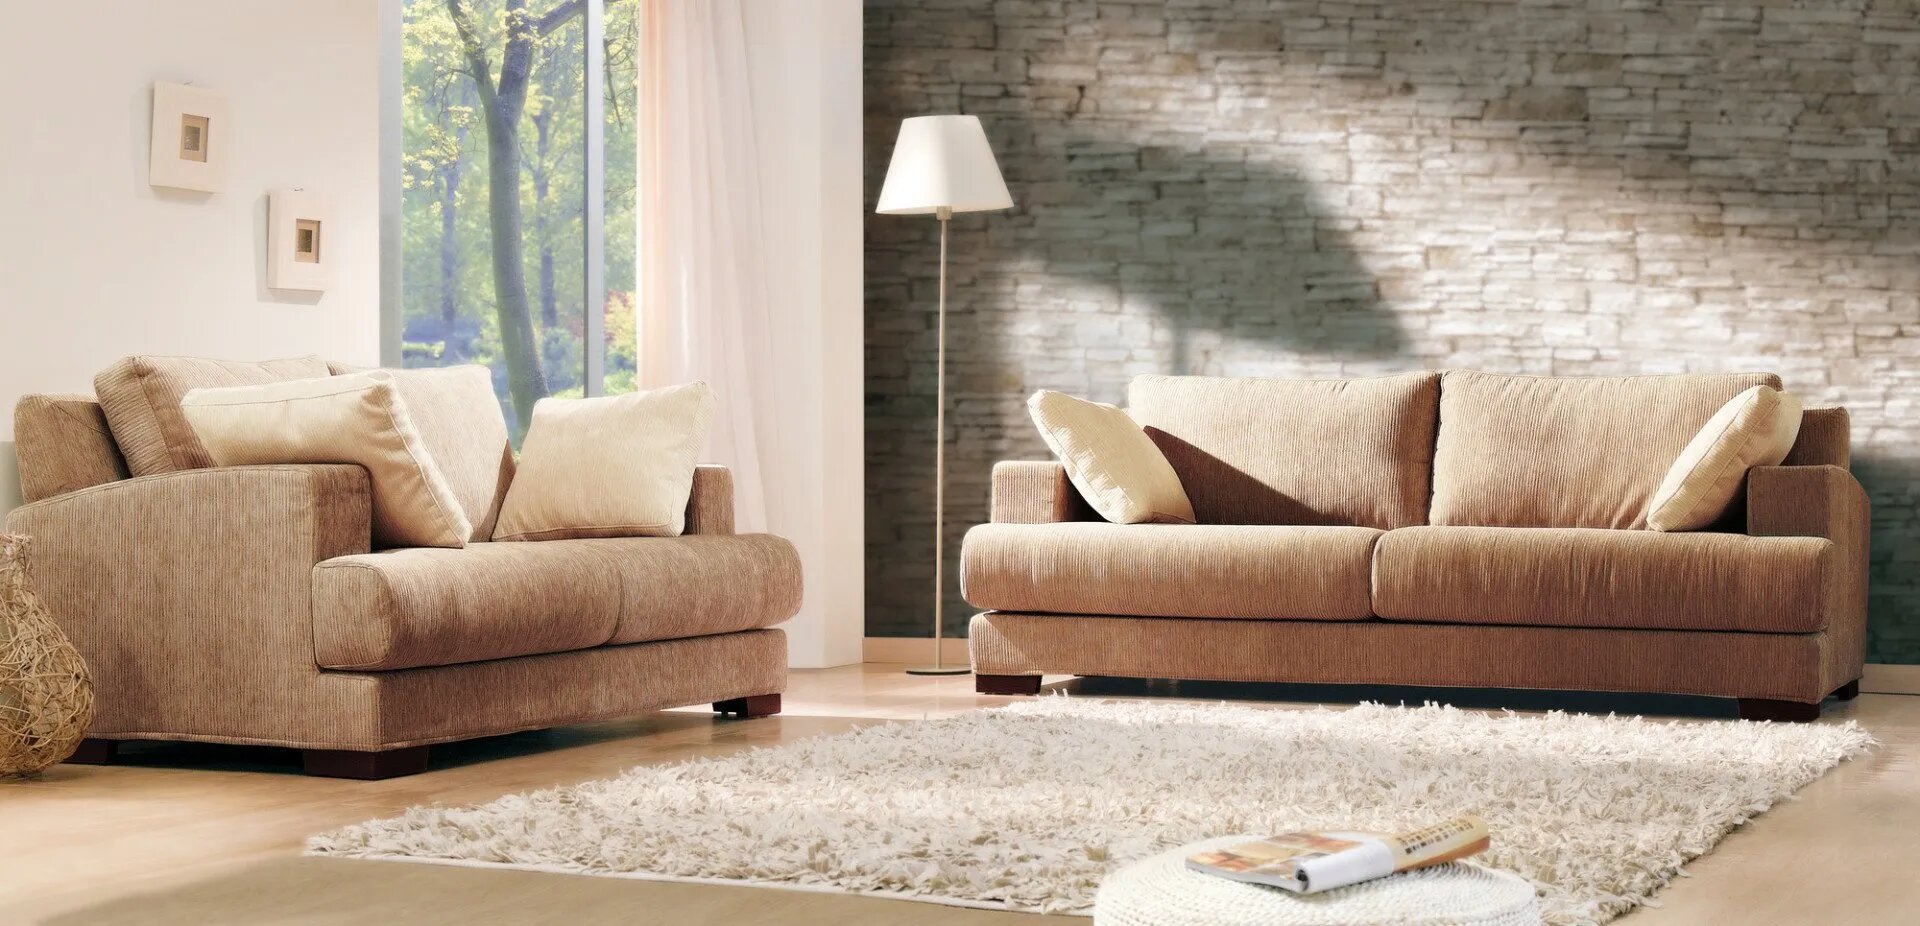 We use the latest technology when it comes to sofa and carpet cleaning